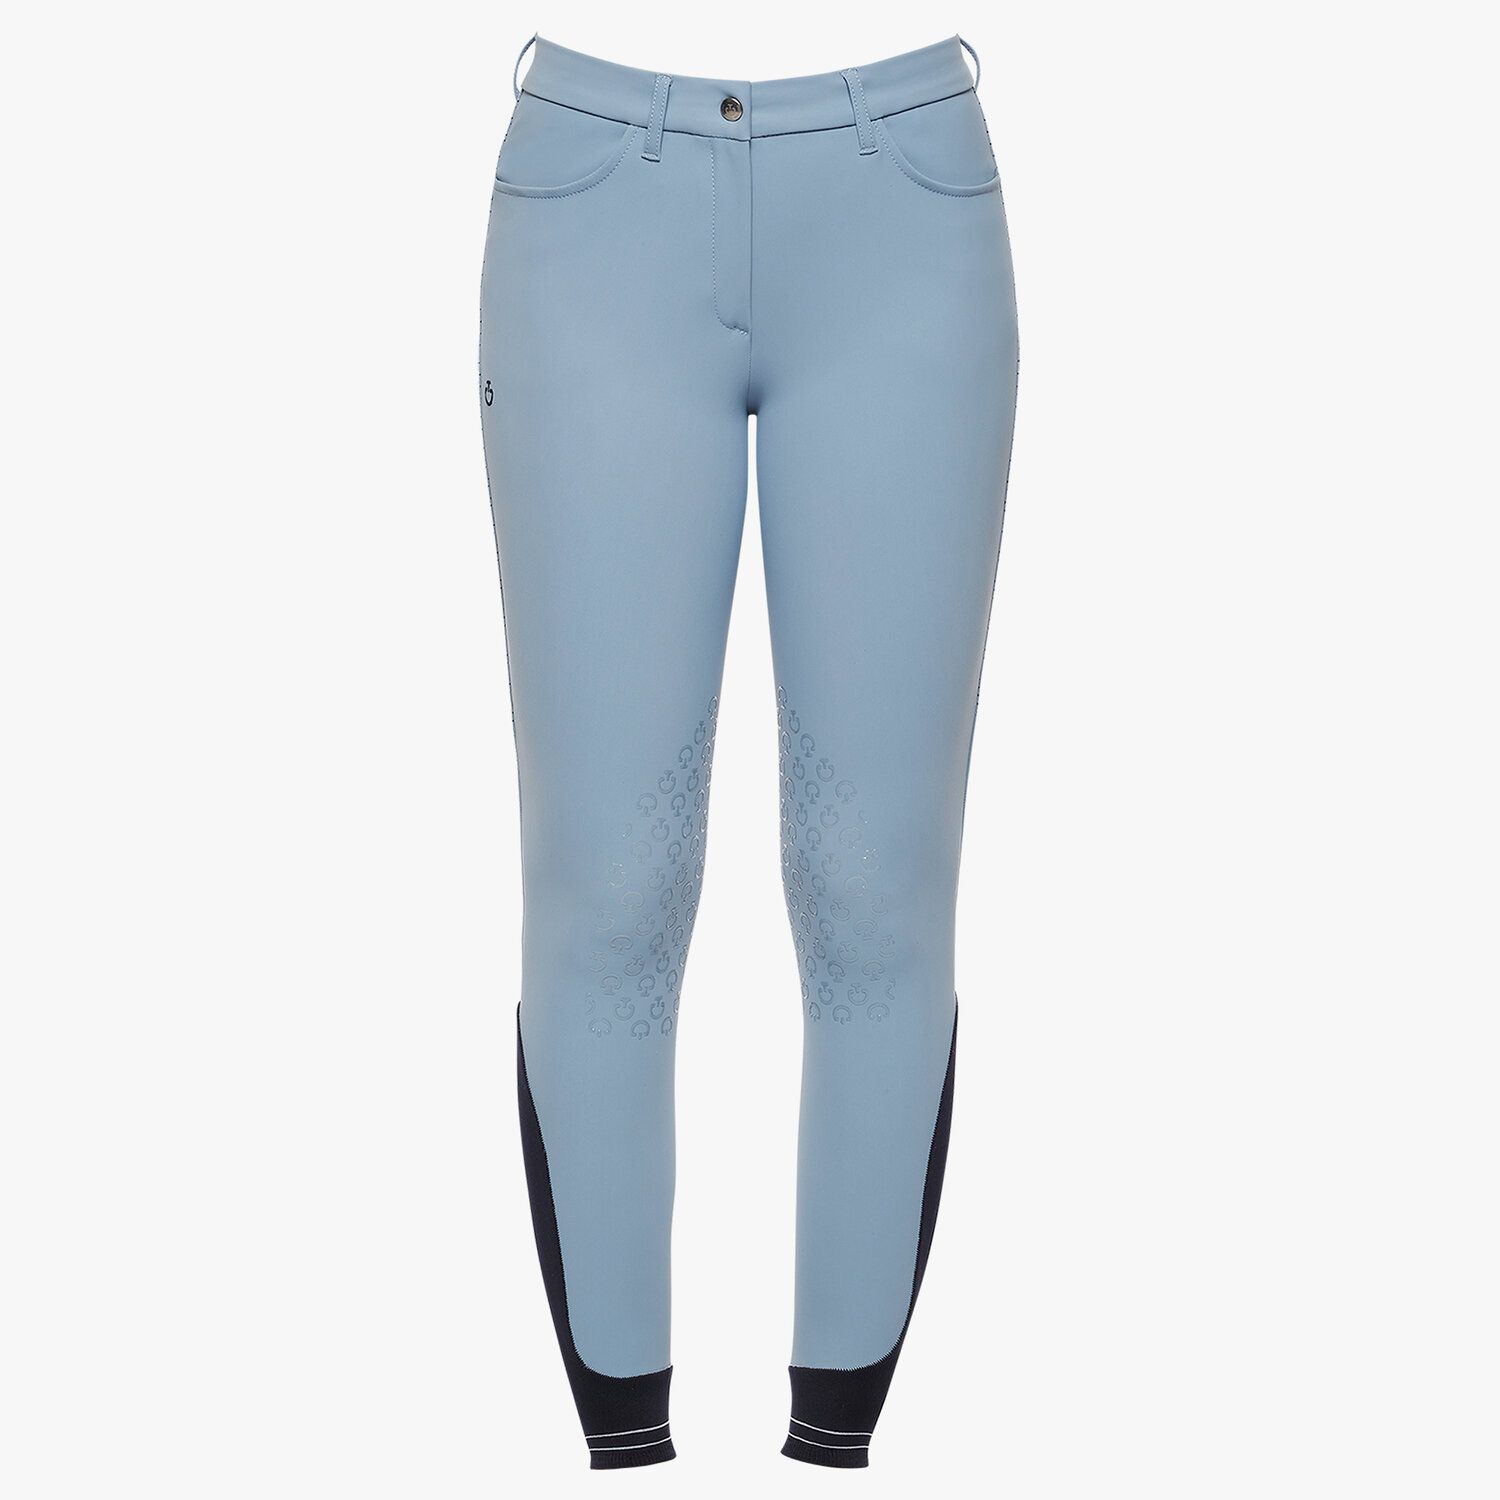 four-way stretch performance breeches